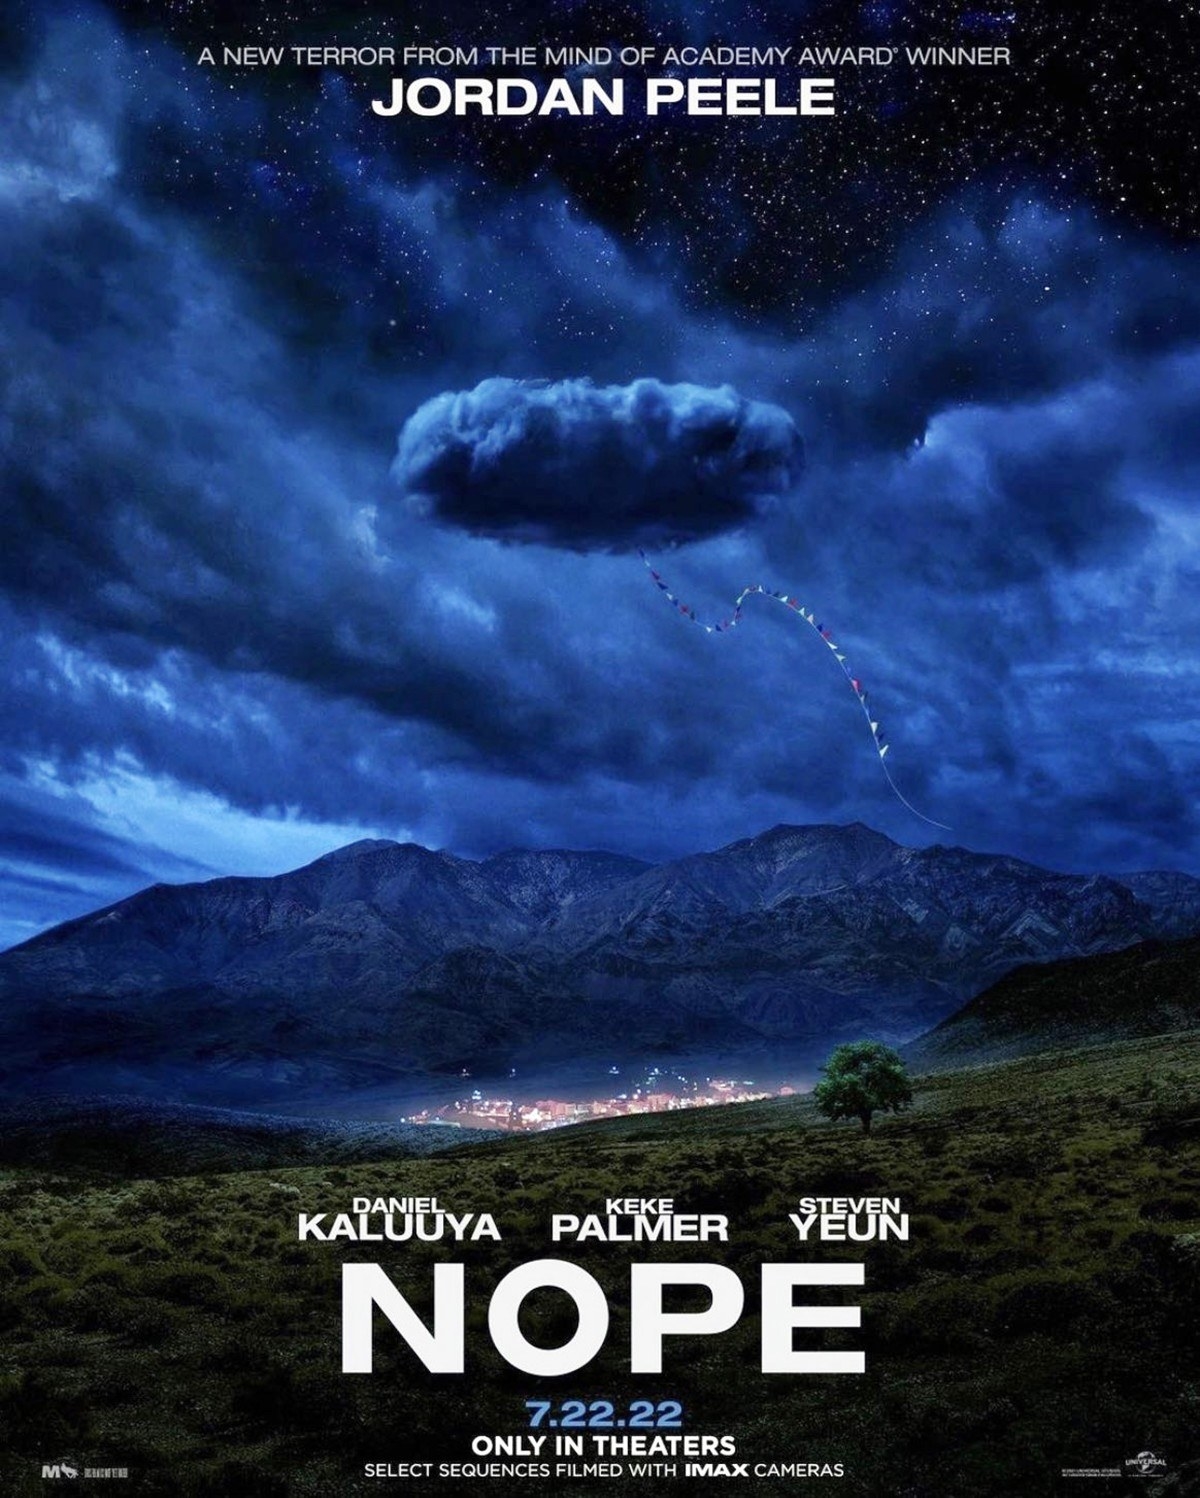 A string of flags hangs out of a cloud in the poster for Nope